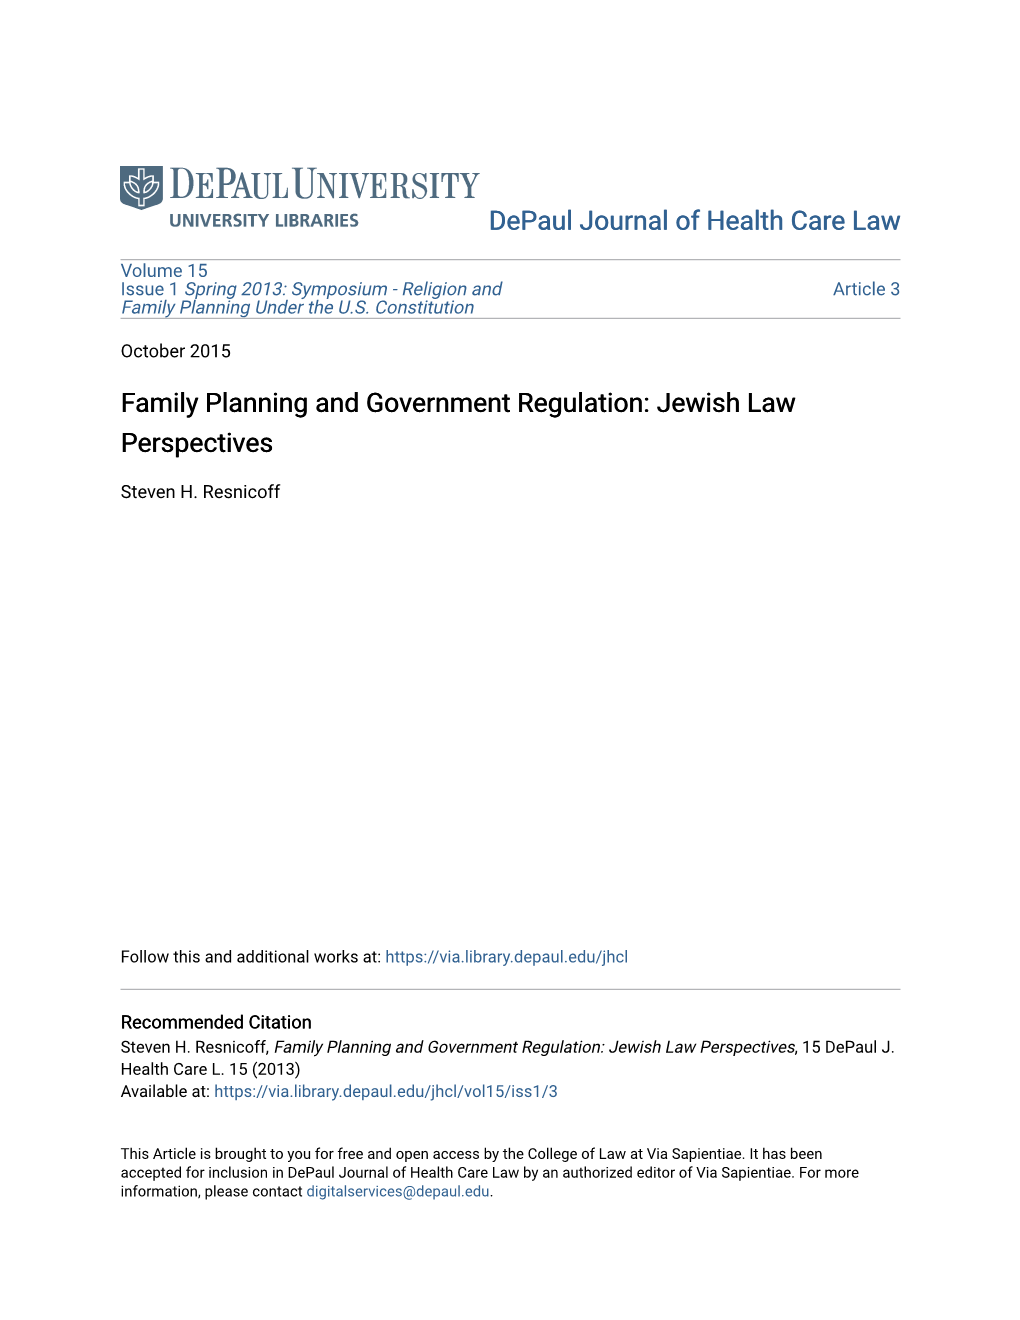 Family Planning and Government Regulation: Jewish Law Perspectives